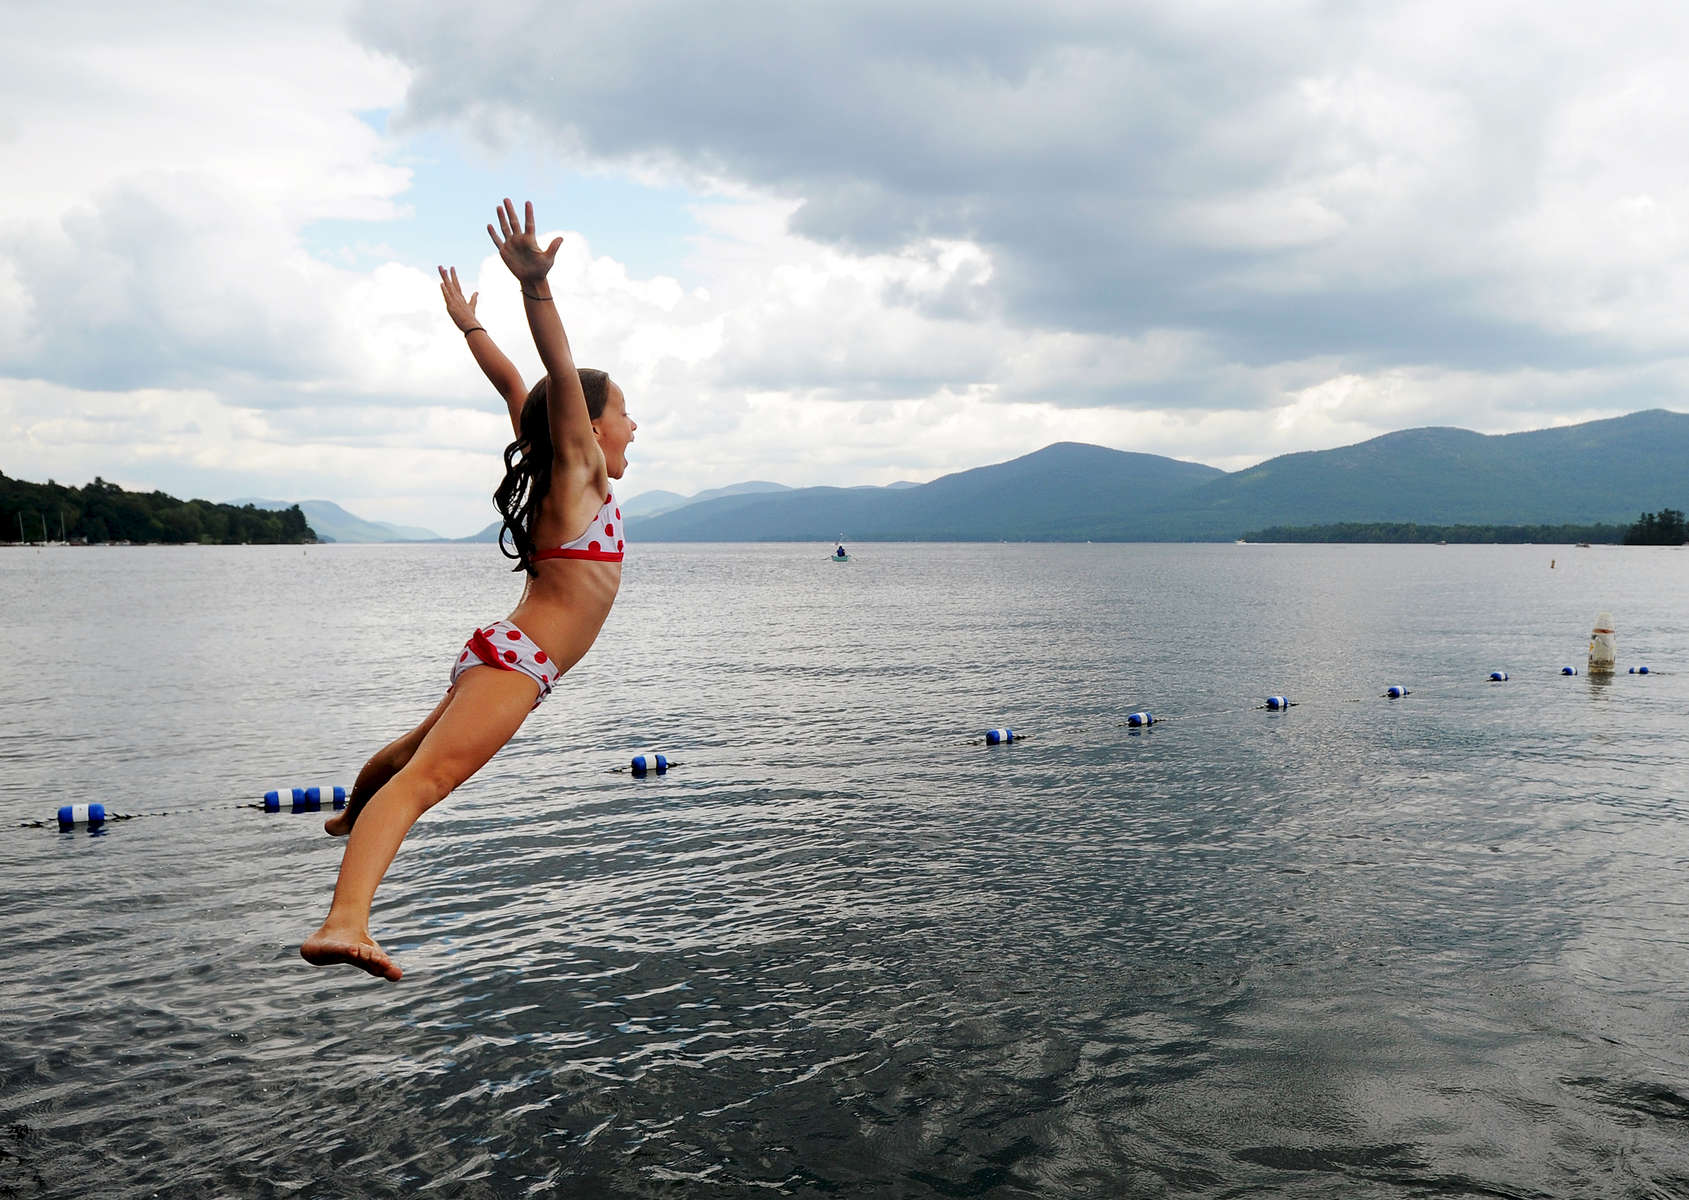 Alice Fox, 9, leaps off the dock and into Lake George at Diamond Point Beach Tuesday, August 28, 2012. Fox was swimming and practicing diving with her sister, Ella, and their mother at the beach as the sun went in and out of the clouds. (Jason McKibben - jmckibben@poststar.com)